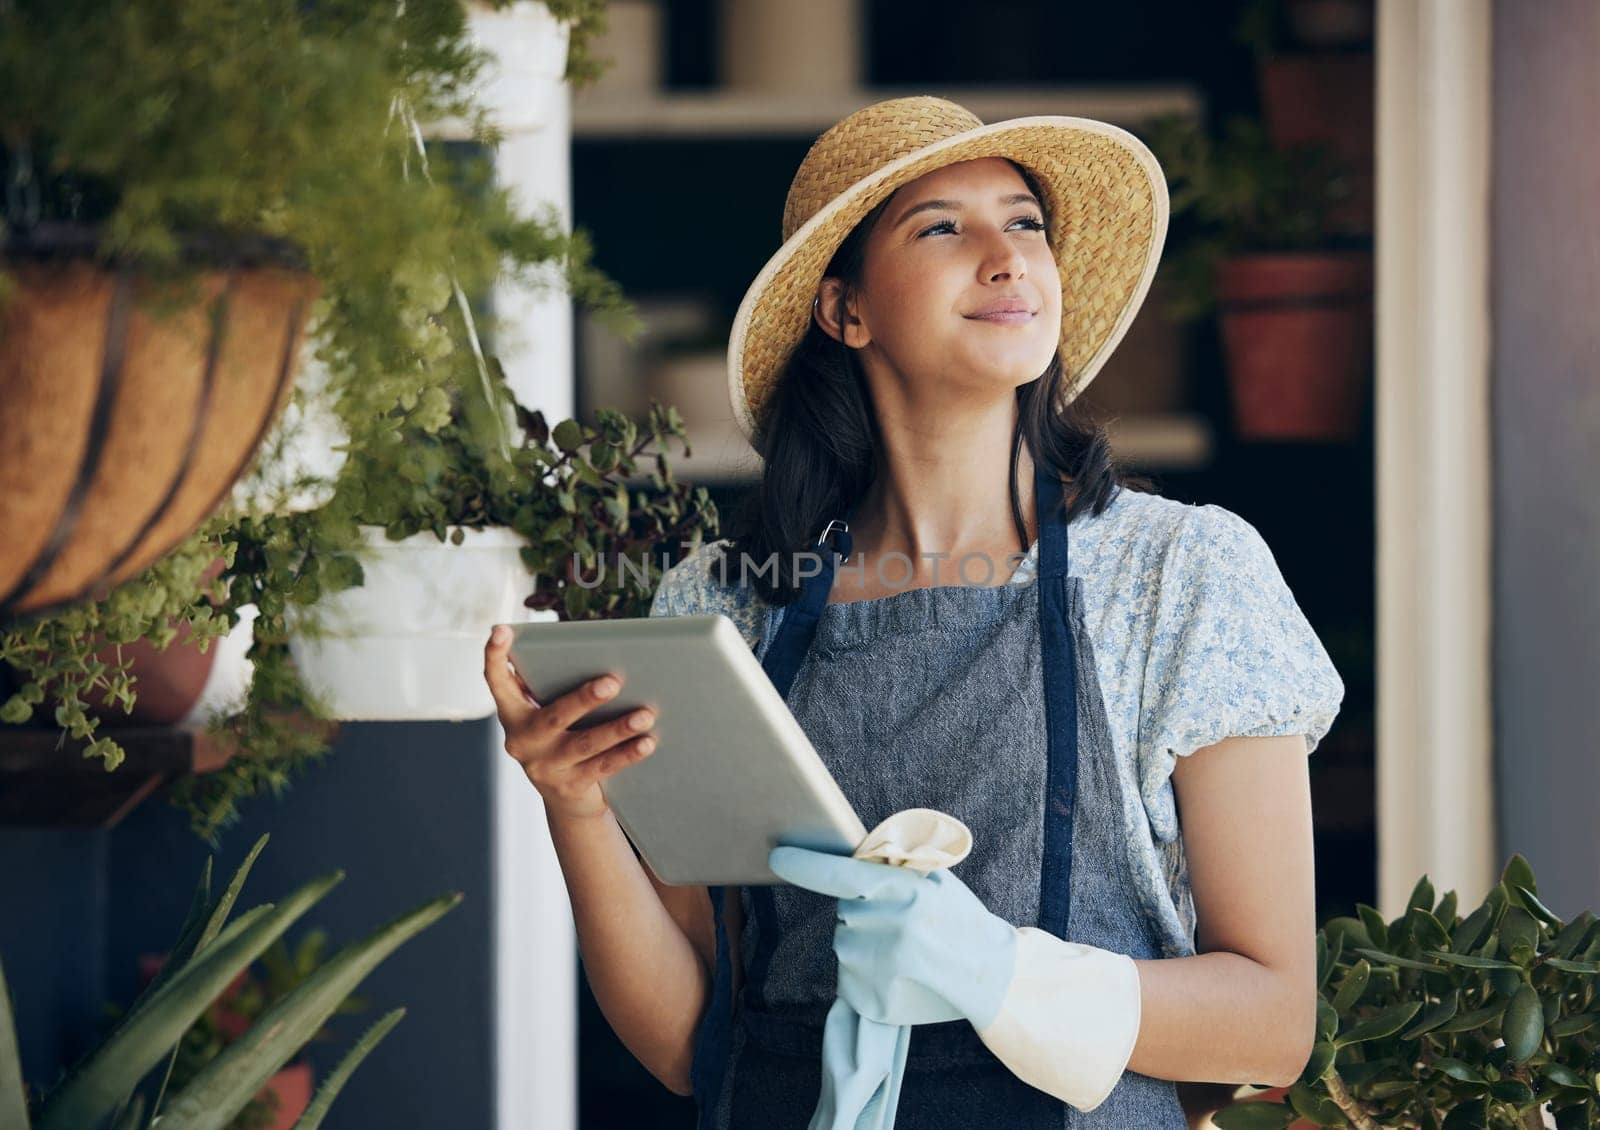 Florist, tablet or woman in business thinking for growth, development ideas and agriculture service. Gardener, nursery and girl farming for plants, horticulture research and floral results online by YuriArcurs